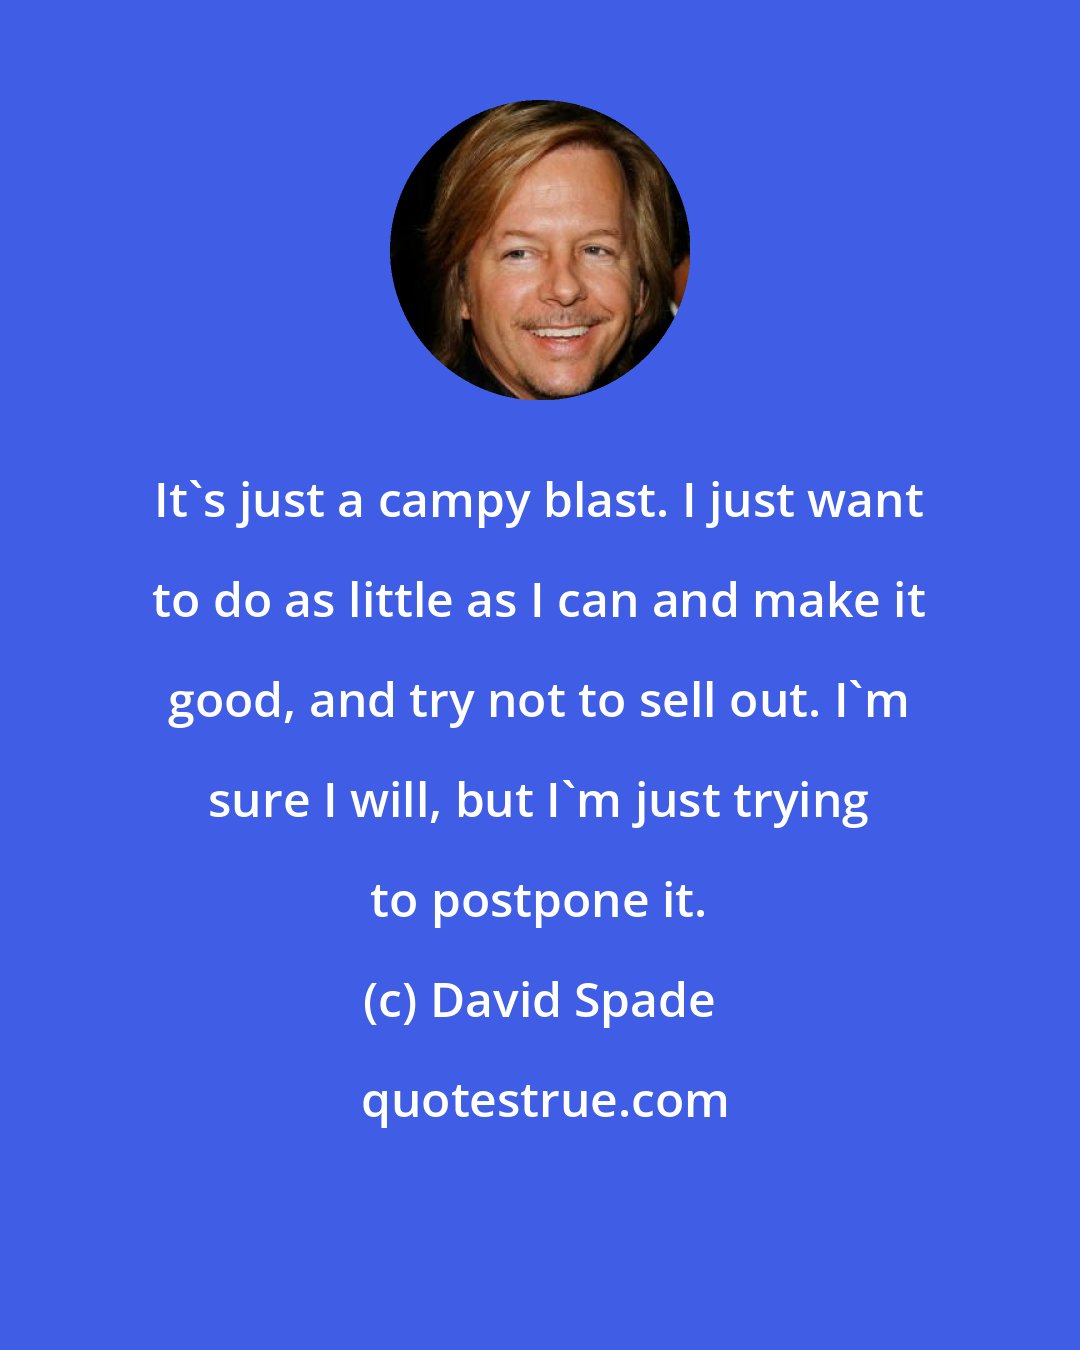 David Spade: It's just a campy blast. I just want to do as little as I can and make it good, and try not to sell out. I'm sure I will, but I'm just trying to postpone it.